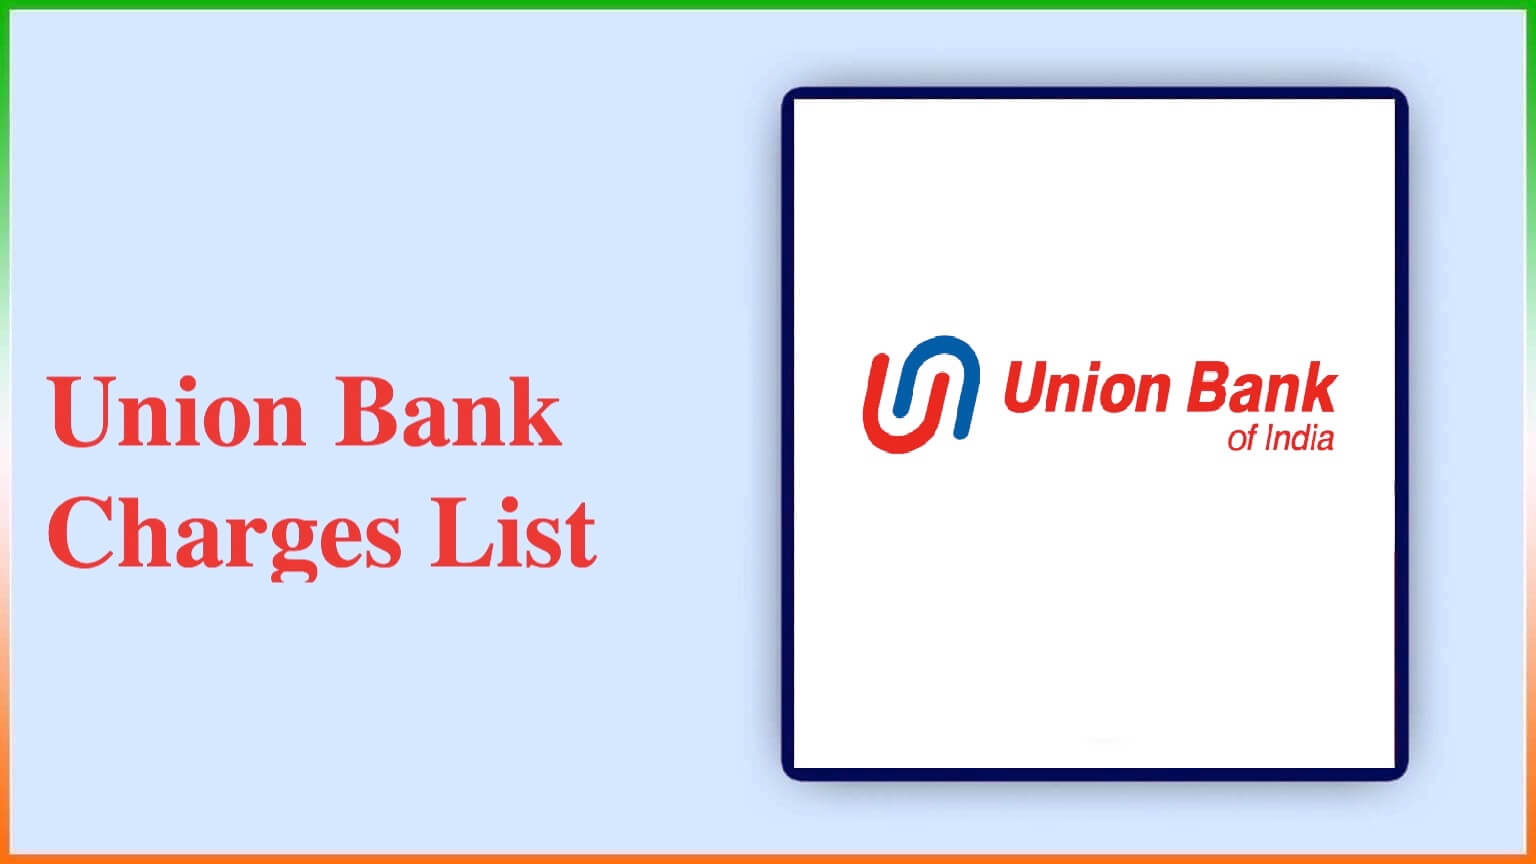 Union Bank Charges List